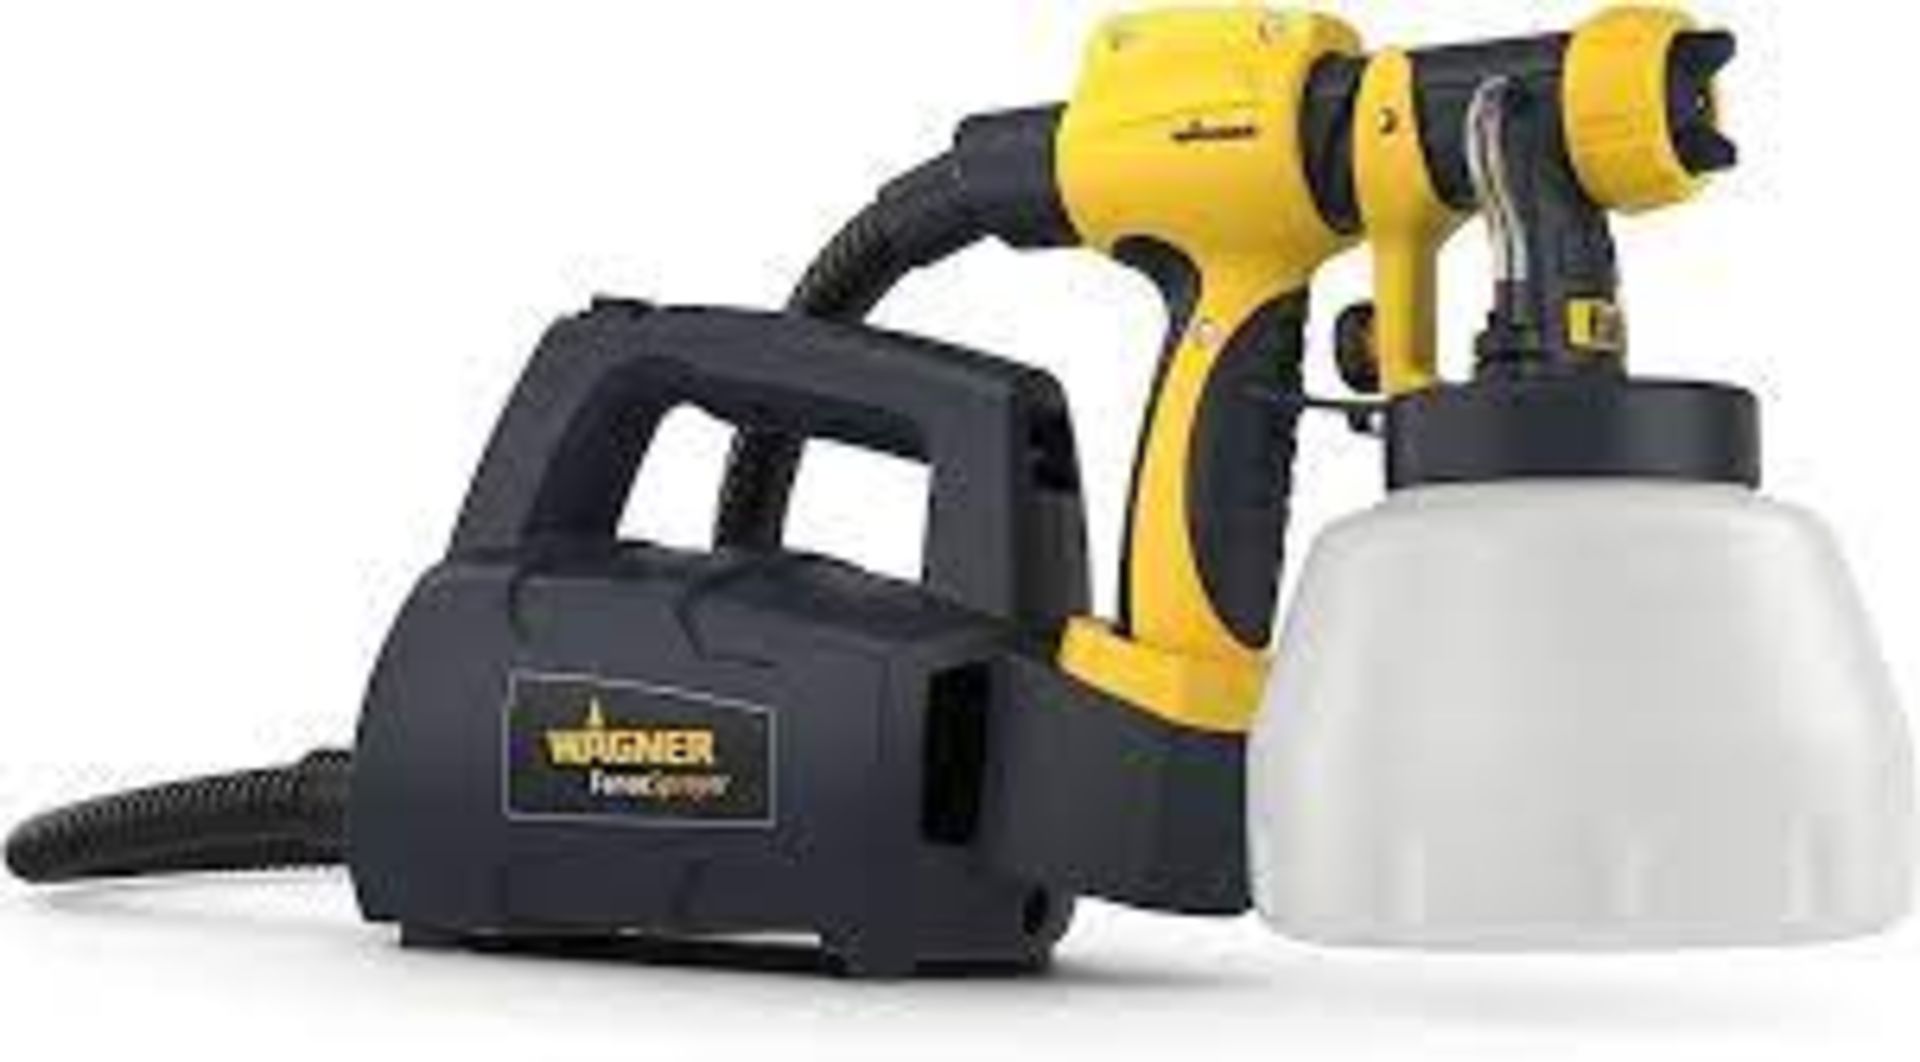 Wagner Coating 240V 460W Fence & decking Paint sprayer. - BI. This black and yellow fence &